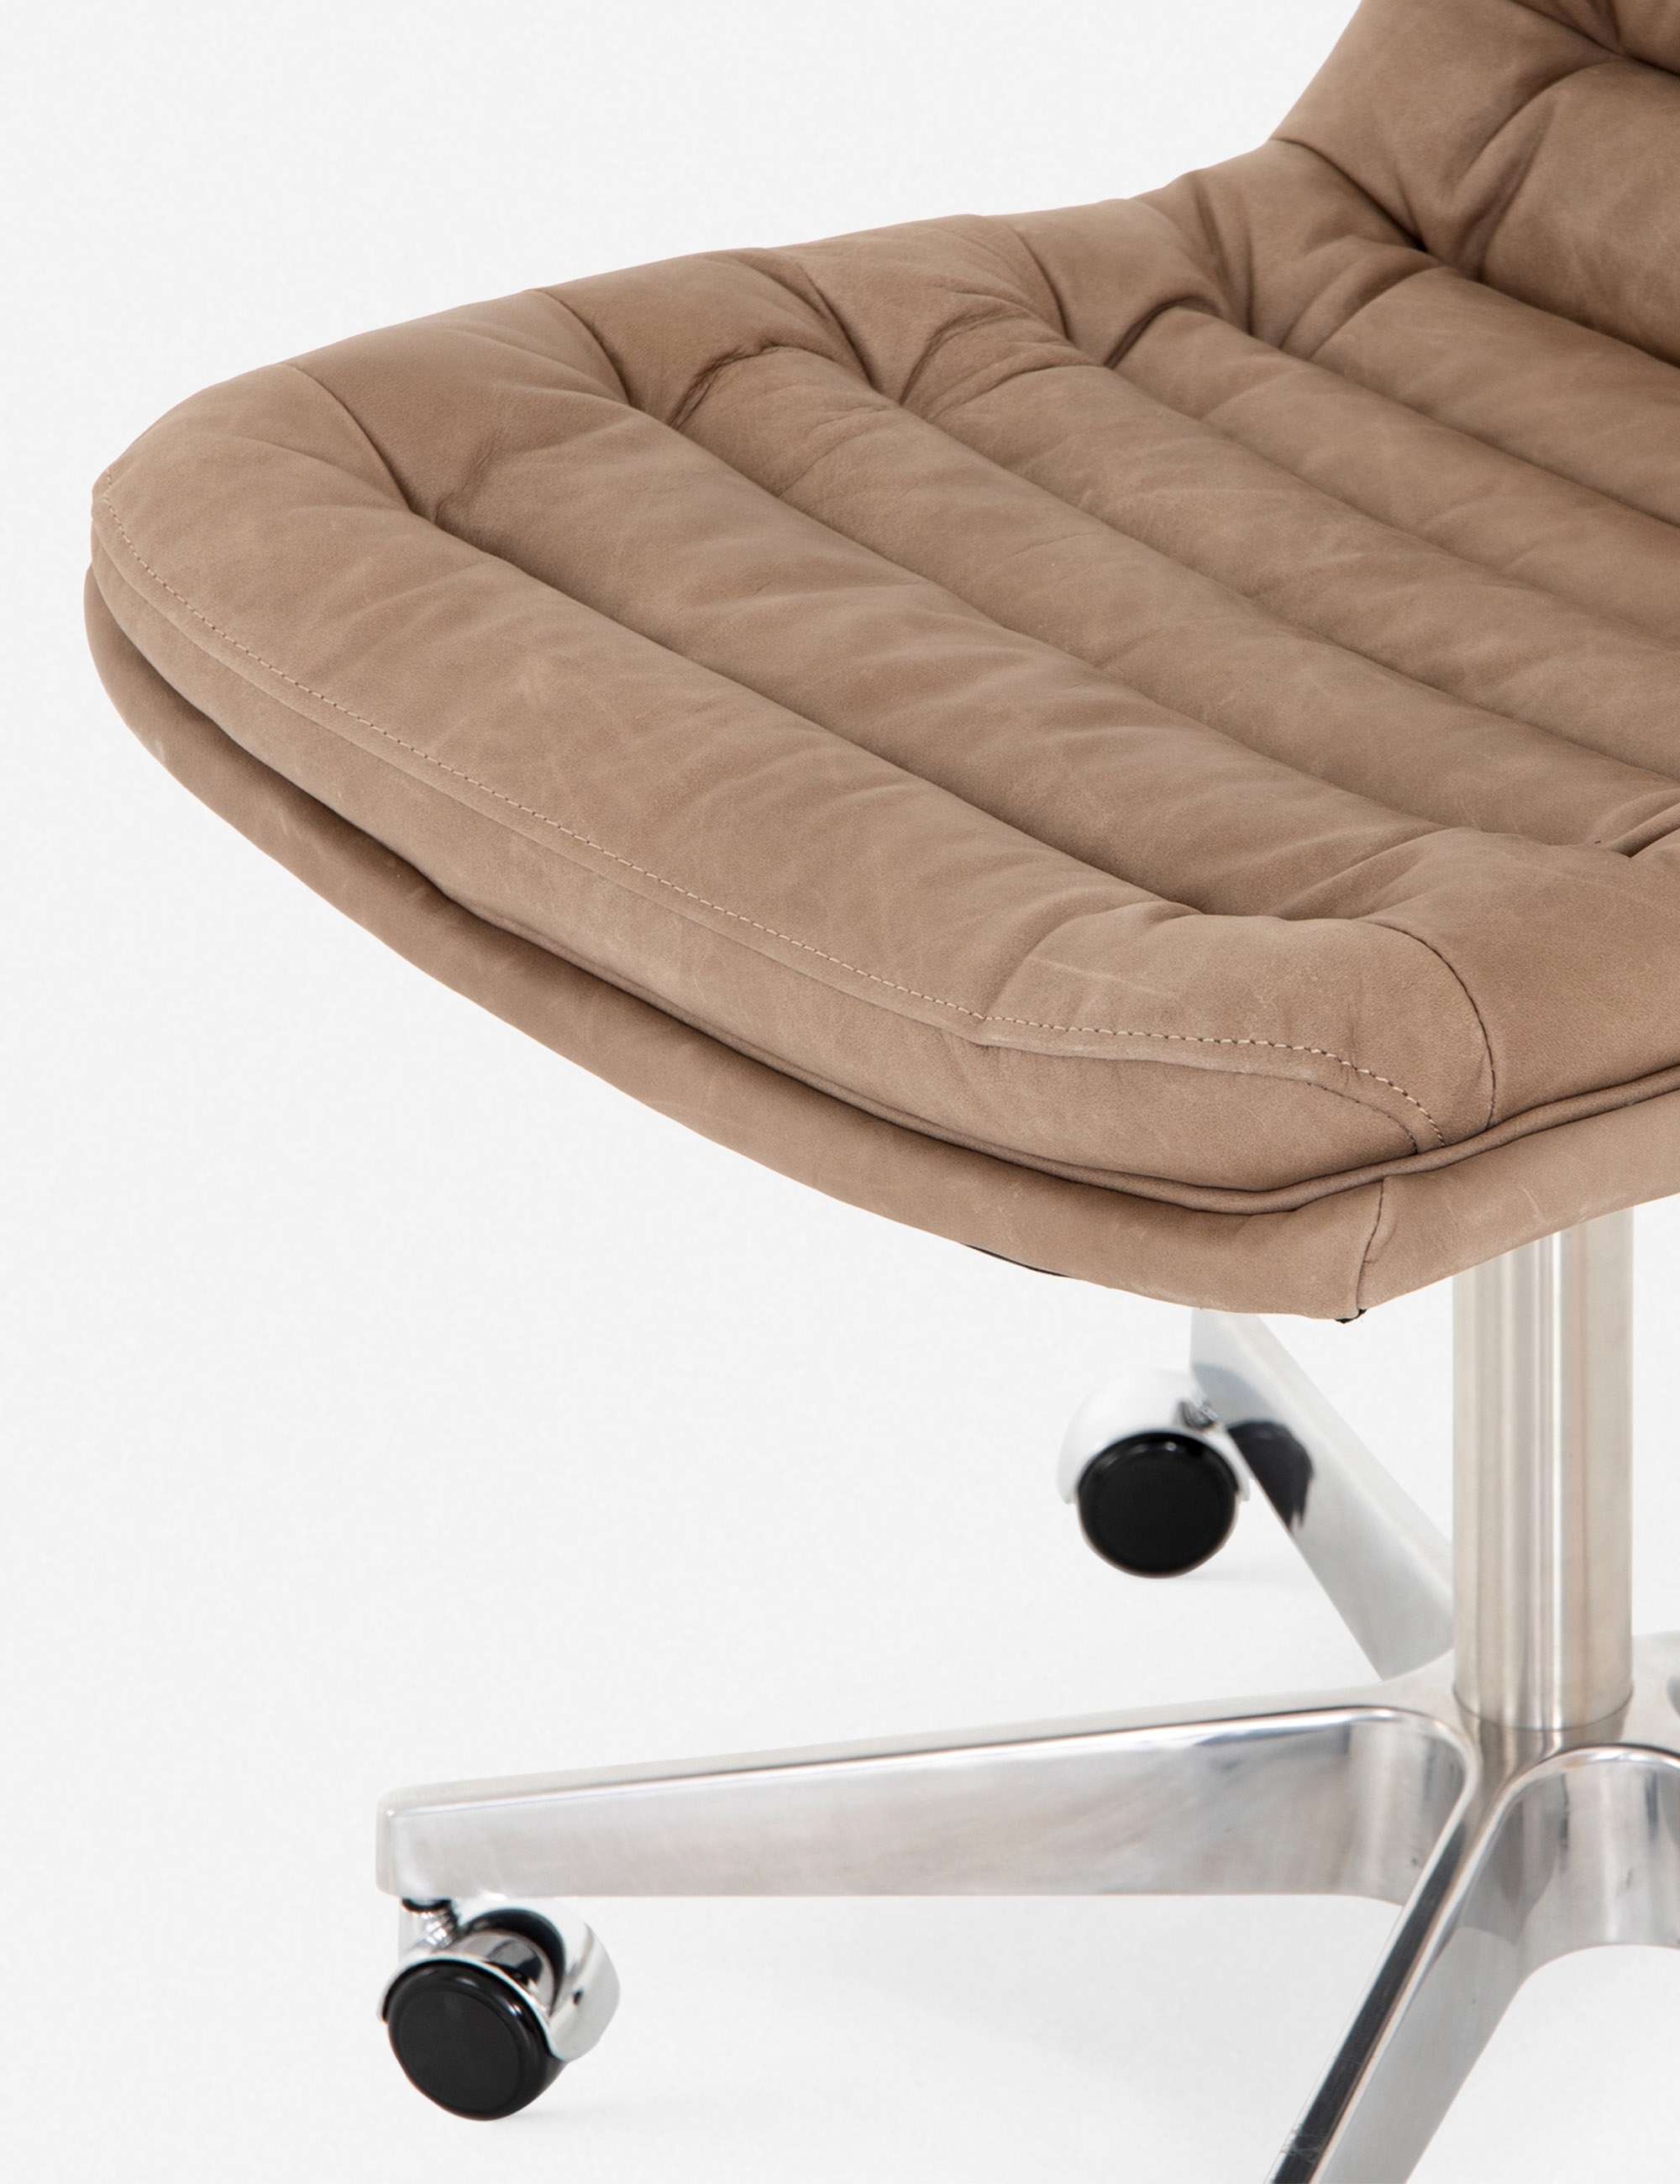 Frassia Office Chair - Image 5